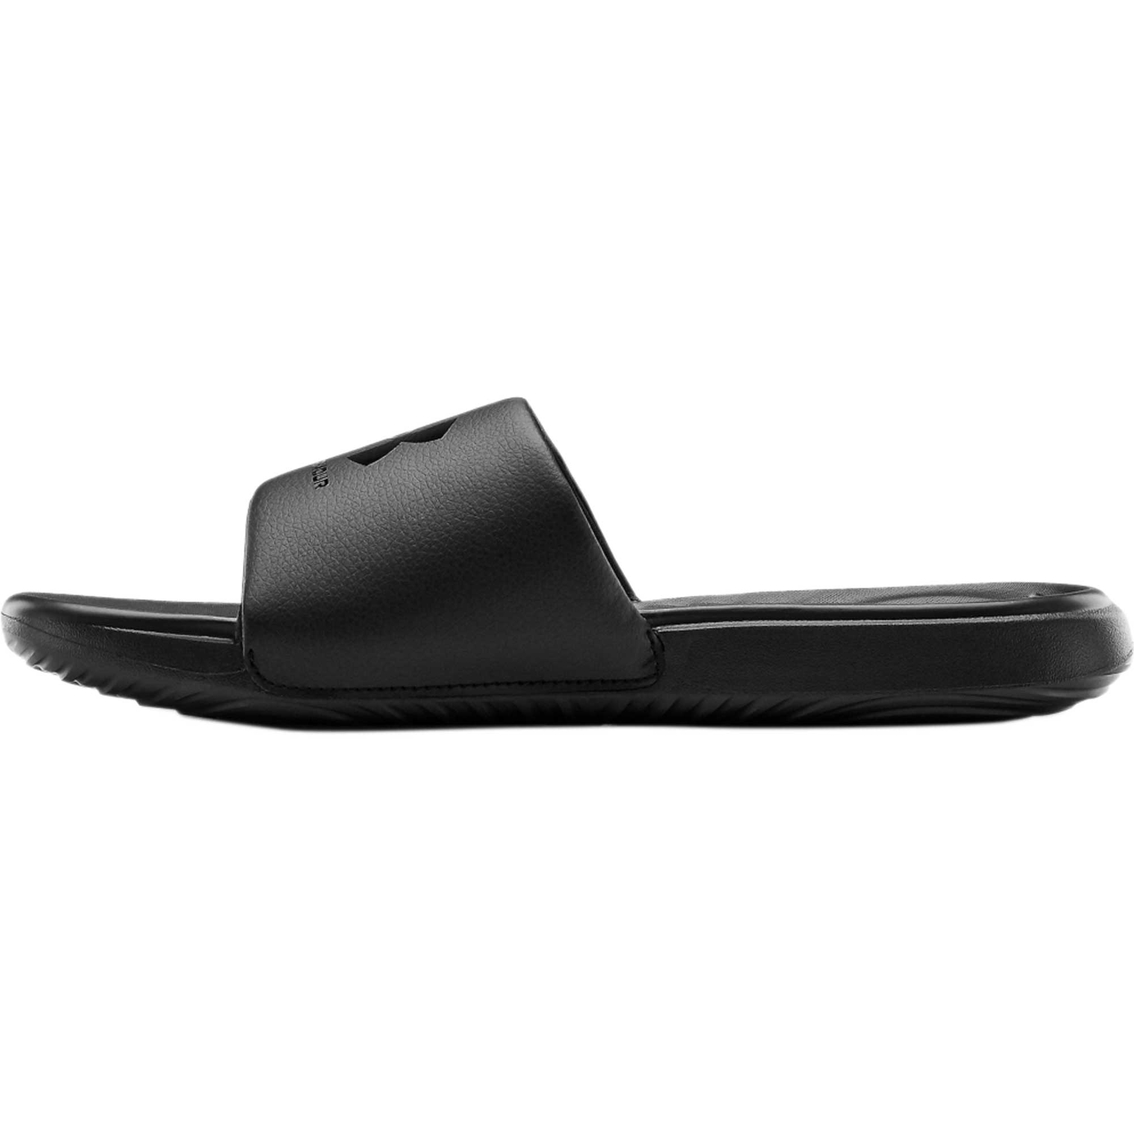 Under Armour Men's Ansa Fixed Slides - Image 3 of 5